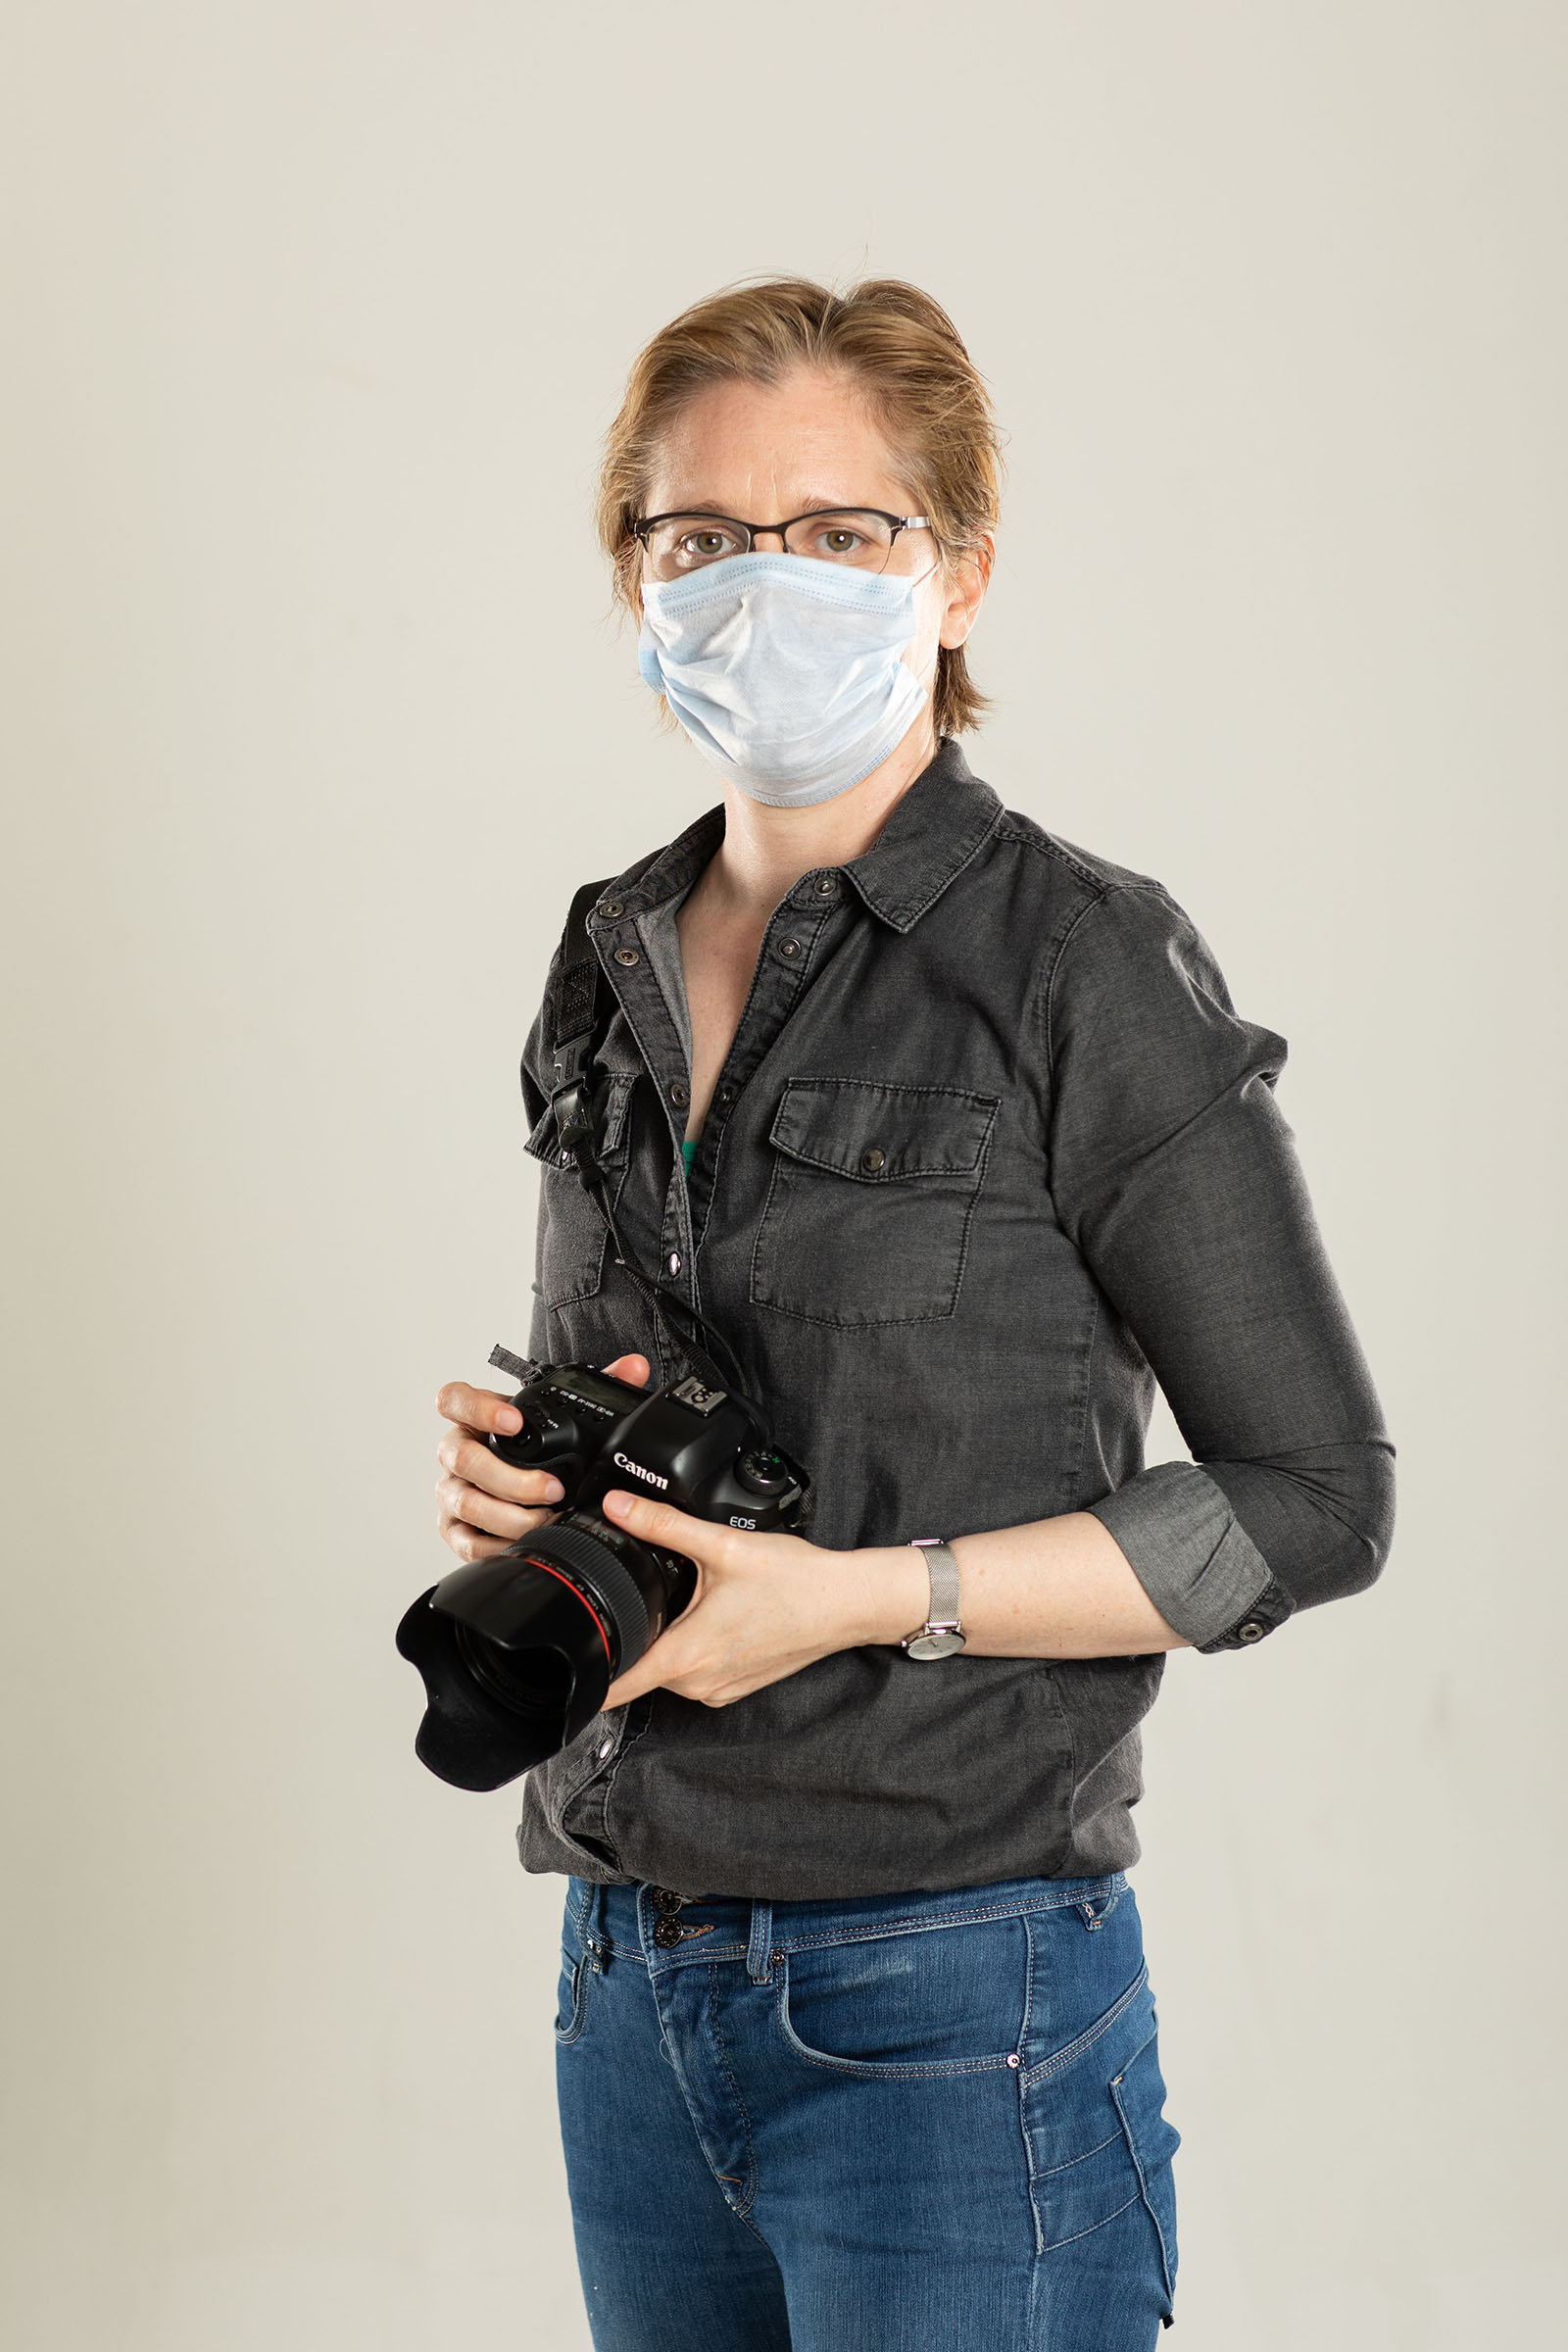 Photograph of the photographer Helen Maybanks in a face mask